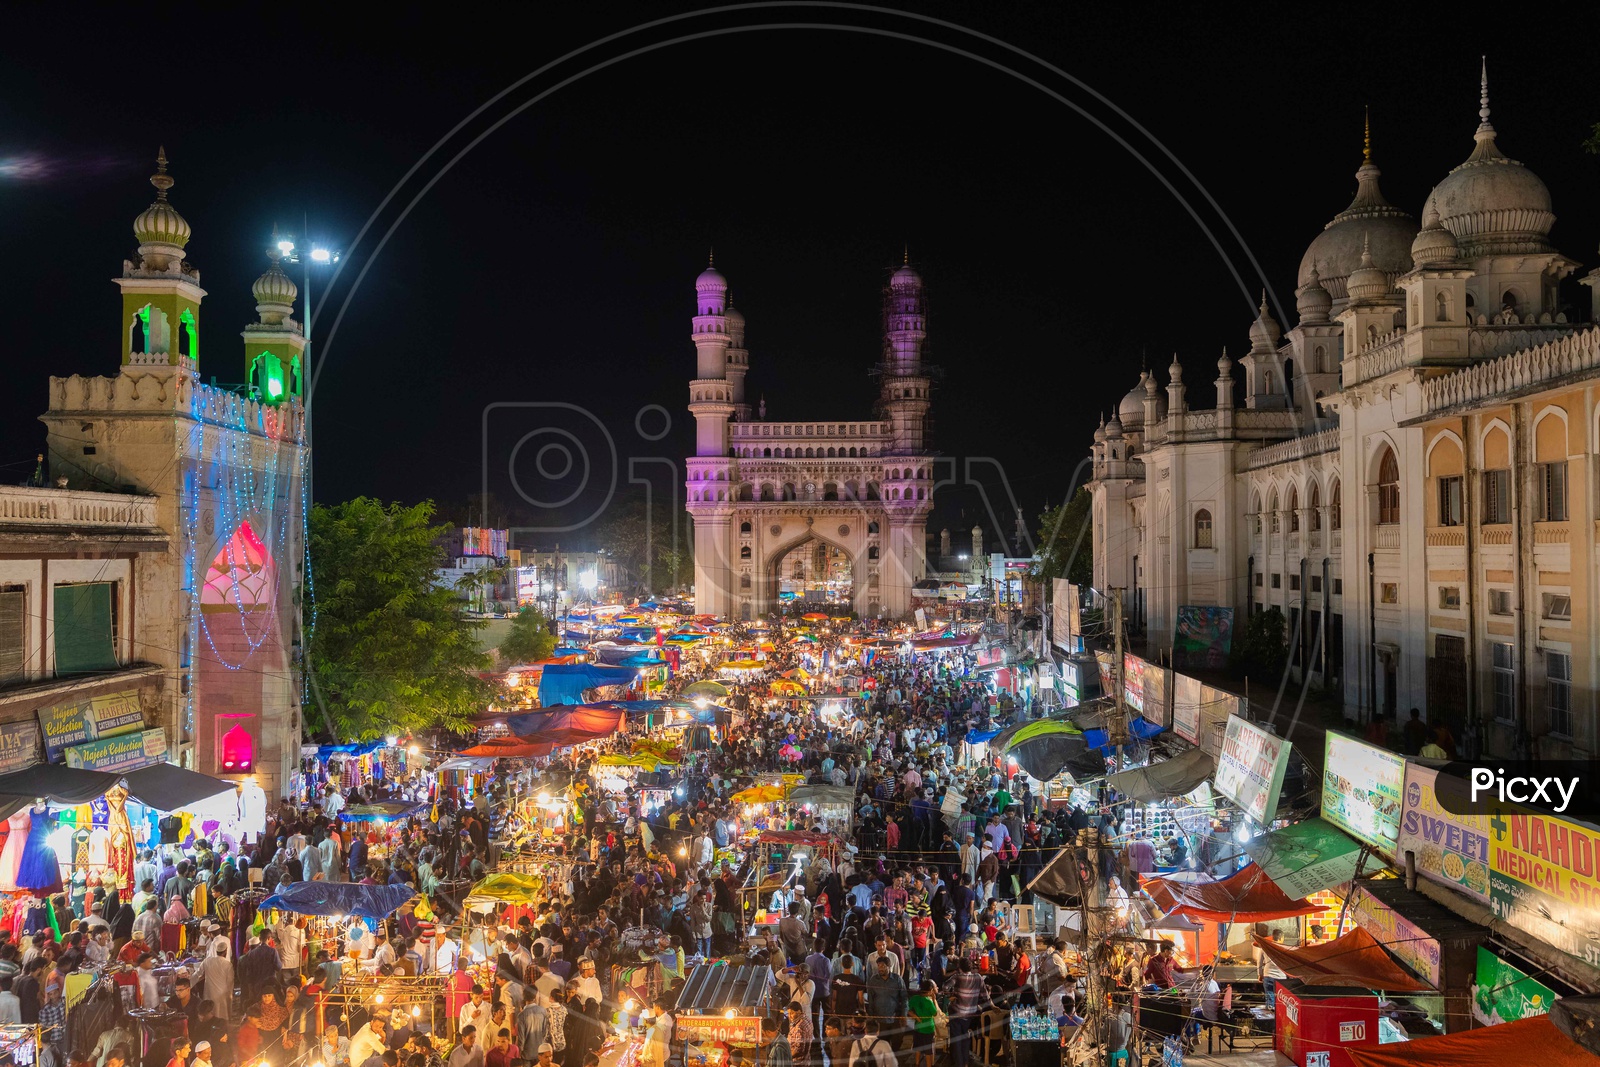 Crowd in street bazaar during the night with charminar in background